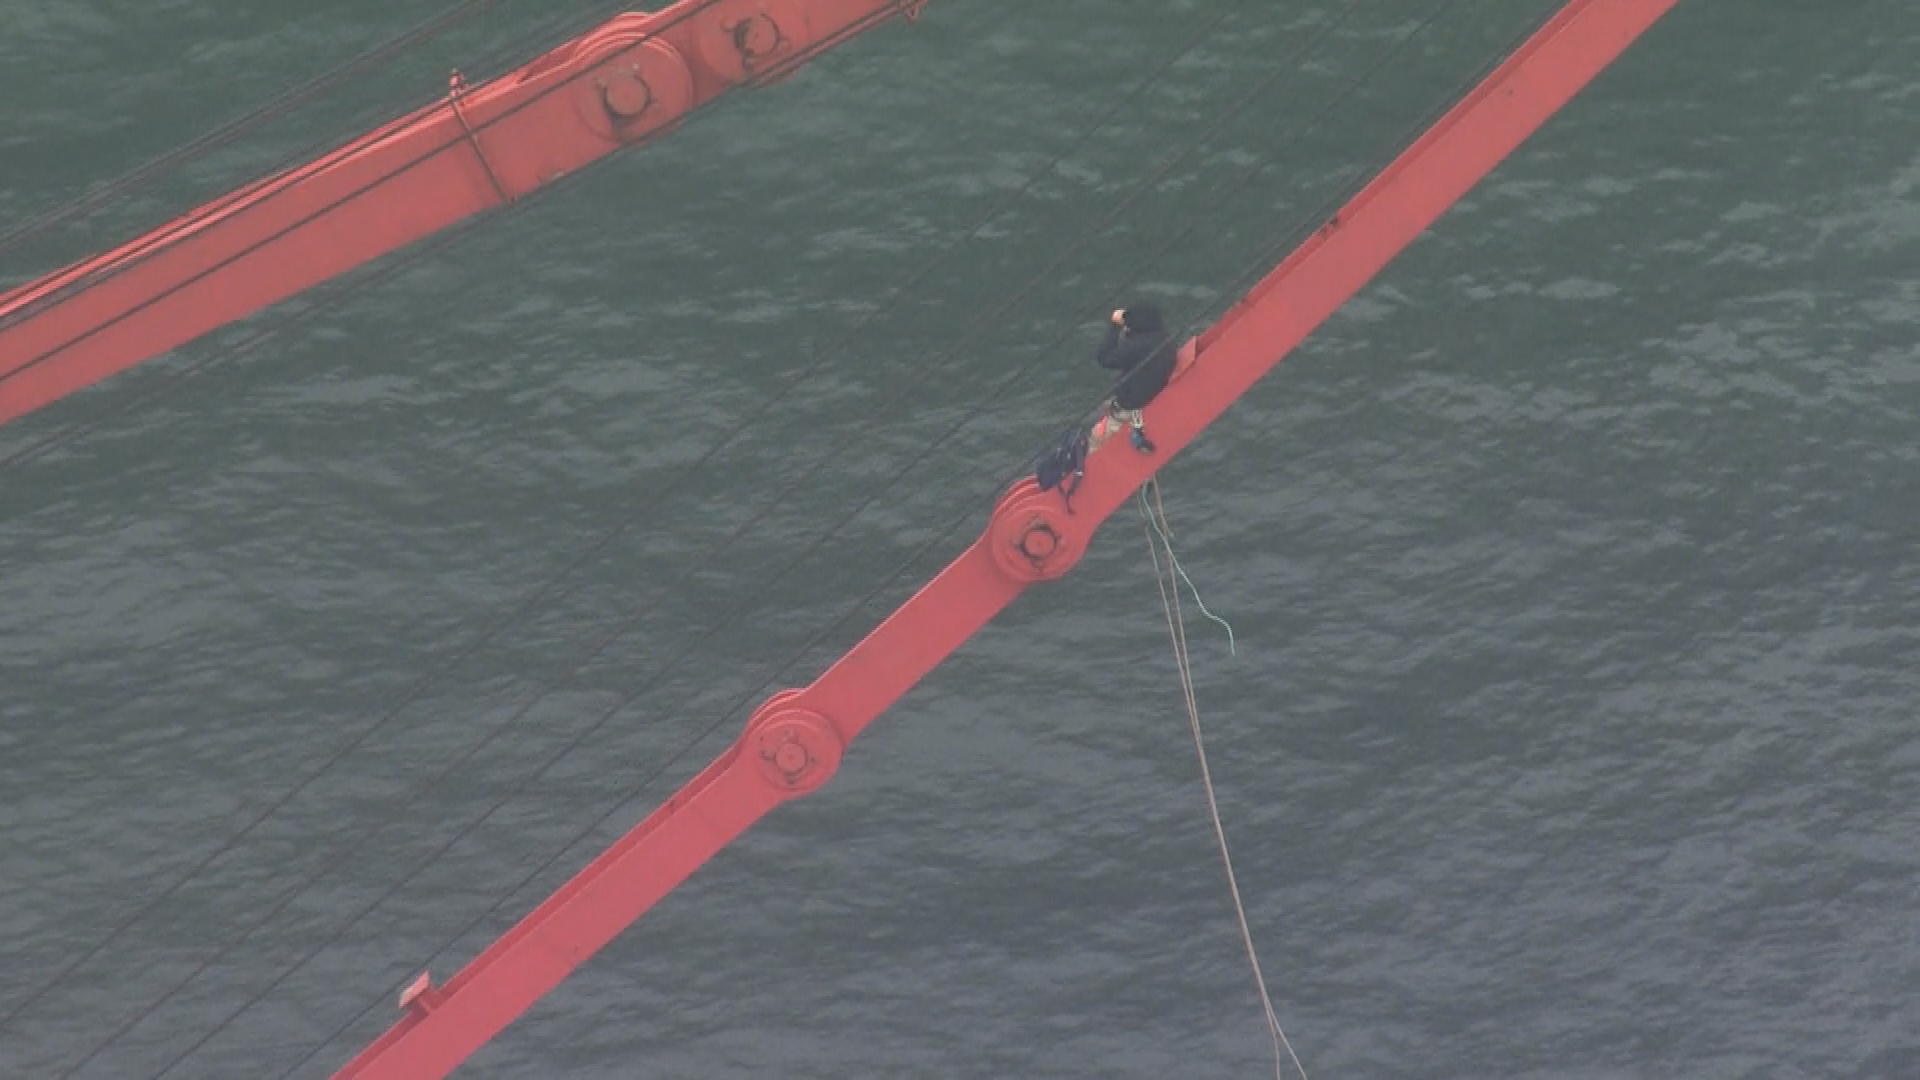 Protester suspends themselves from crane at Port Botany.